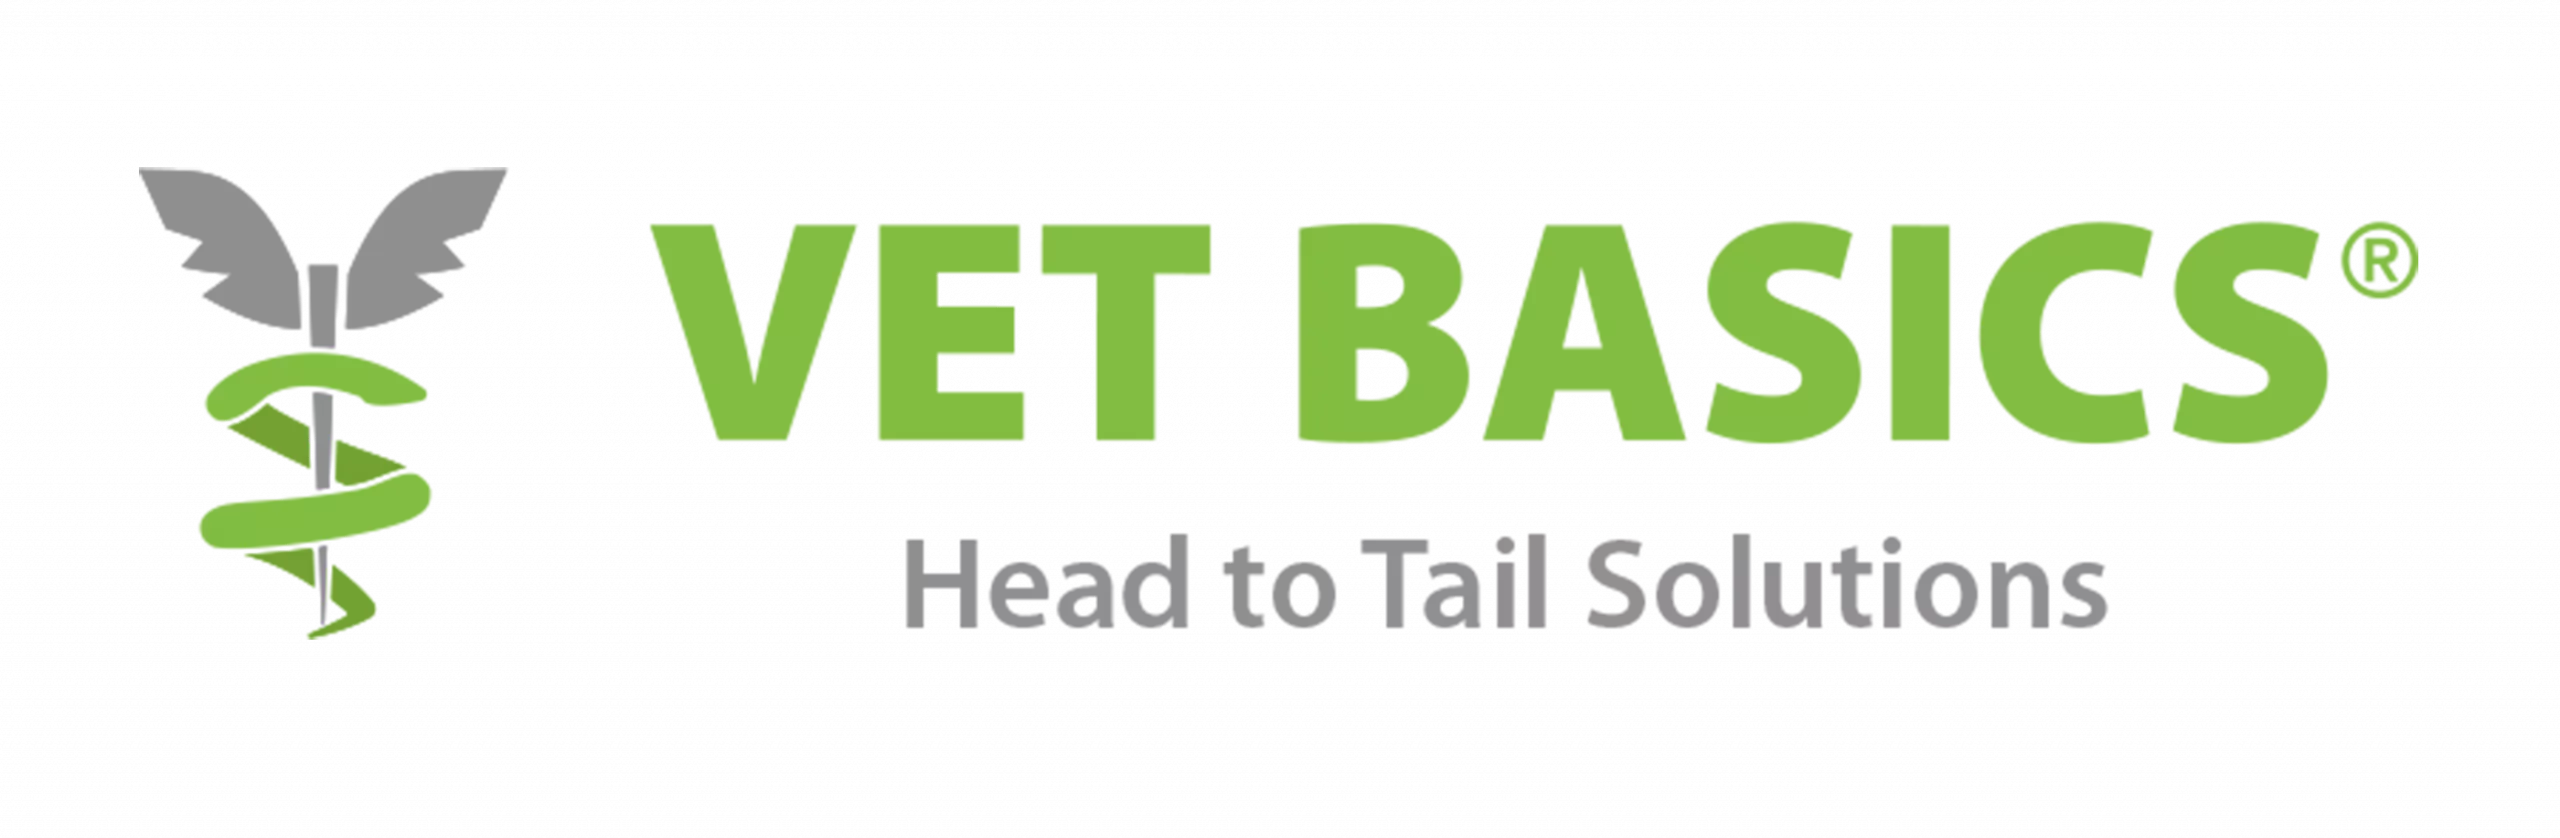 Green and grey Vet Basics logo with the slogan Head to Tail Solutions